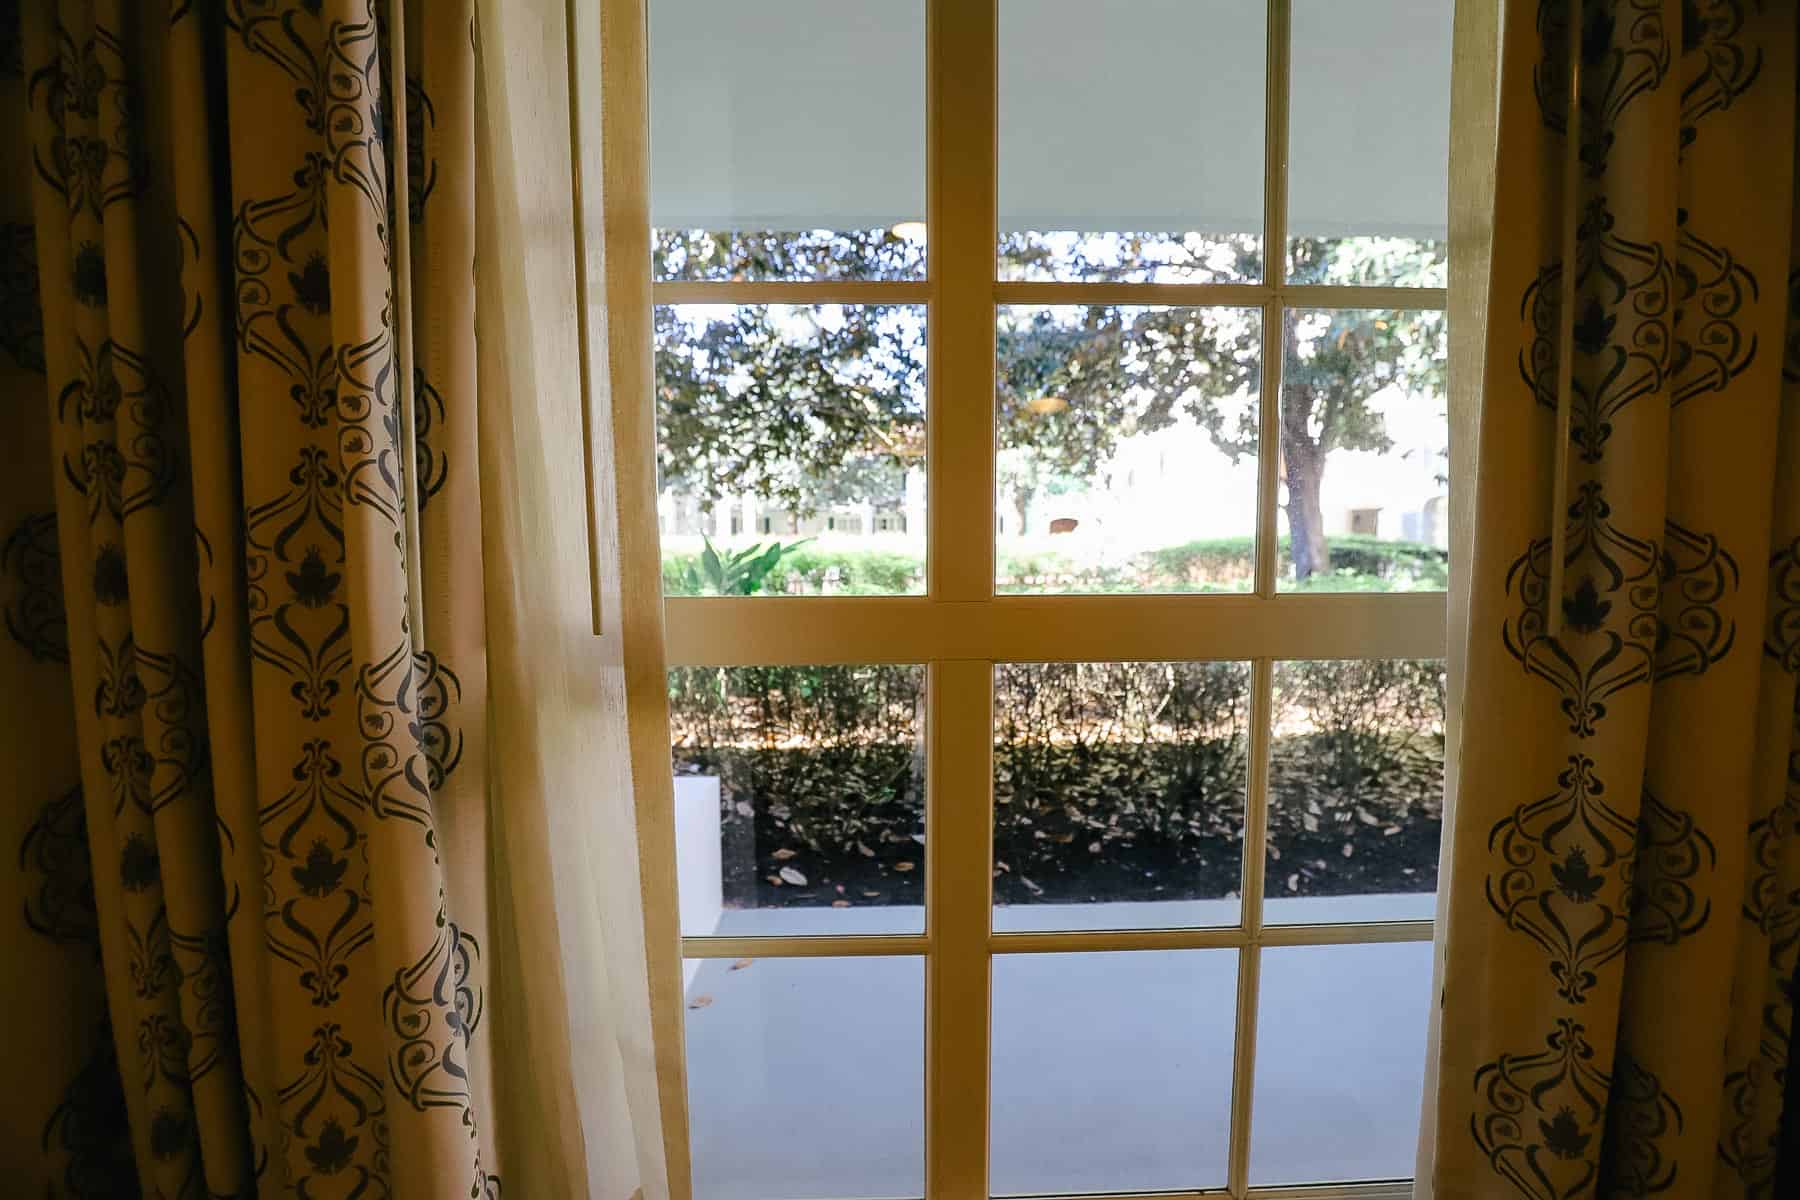 the view out to the garden of Magnolia Terrace